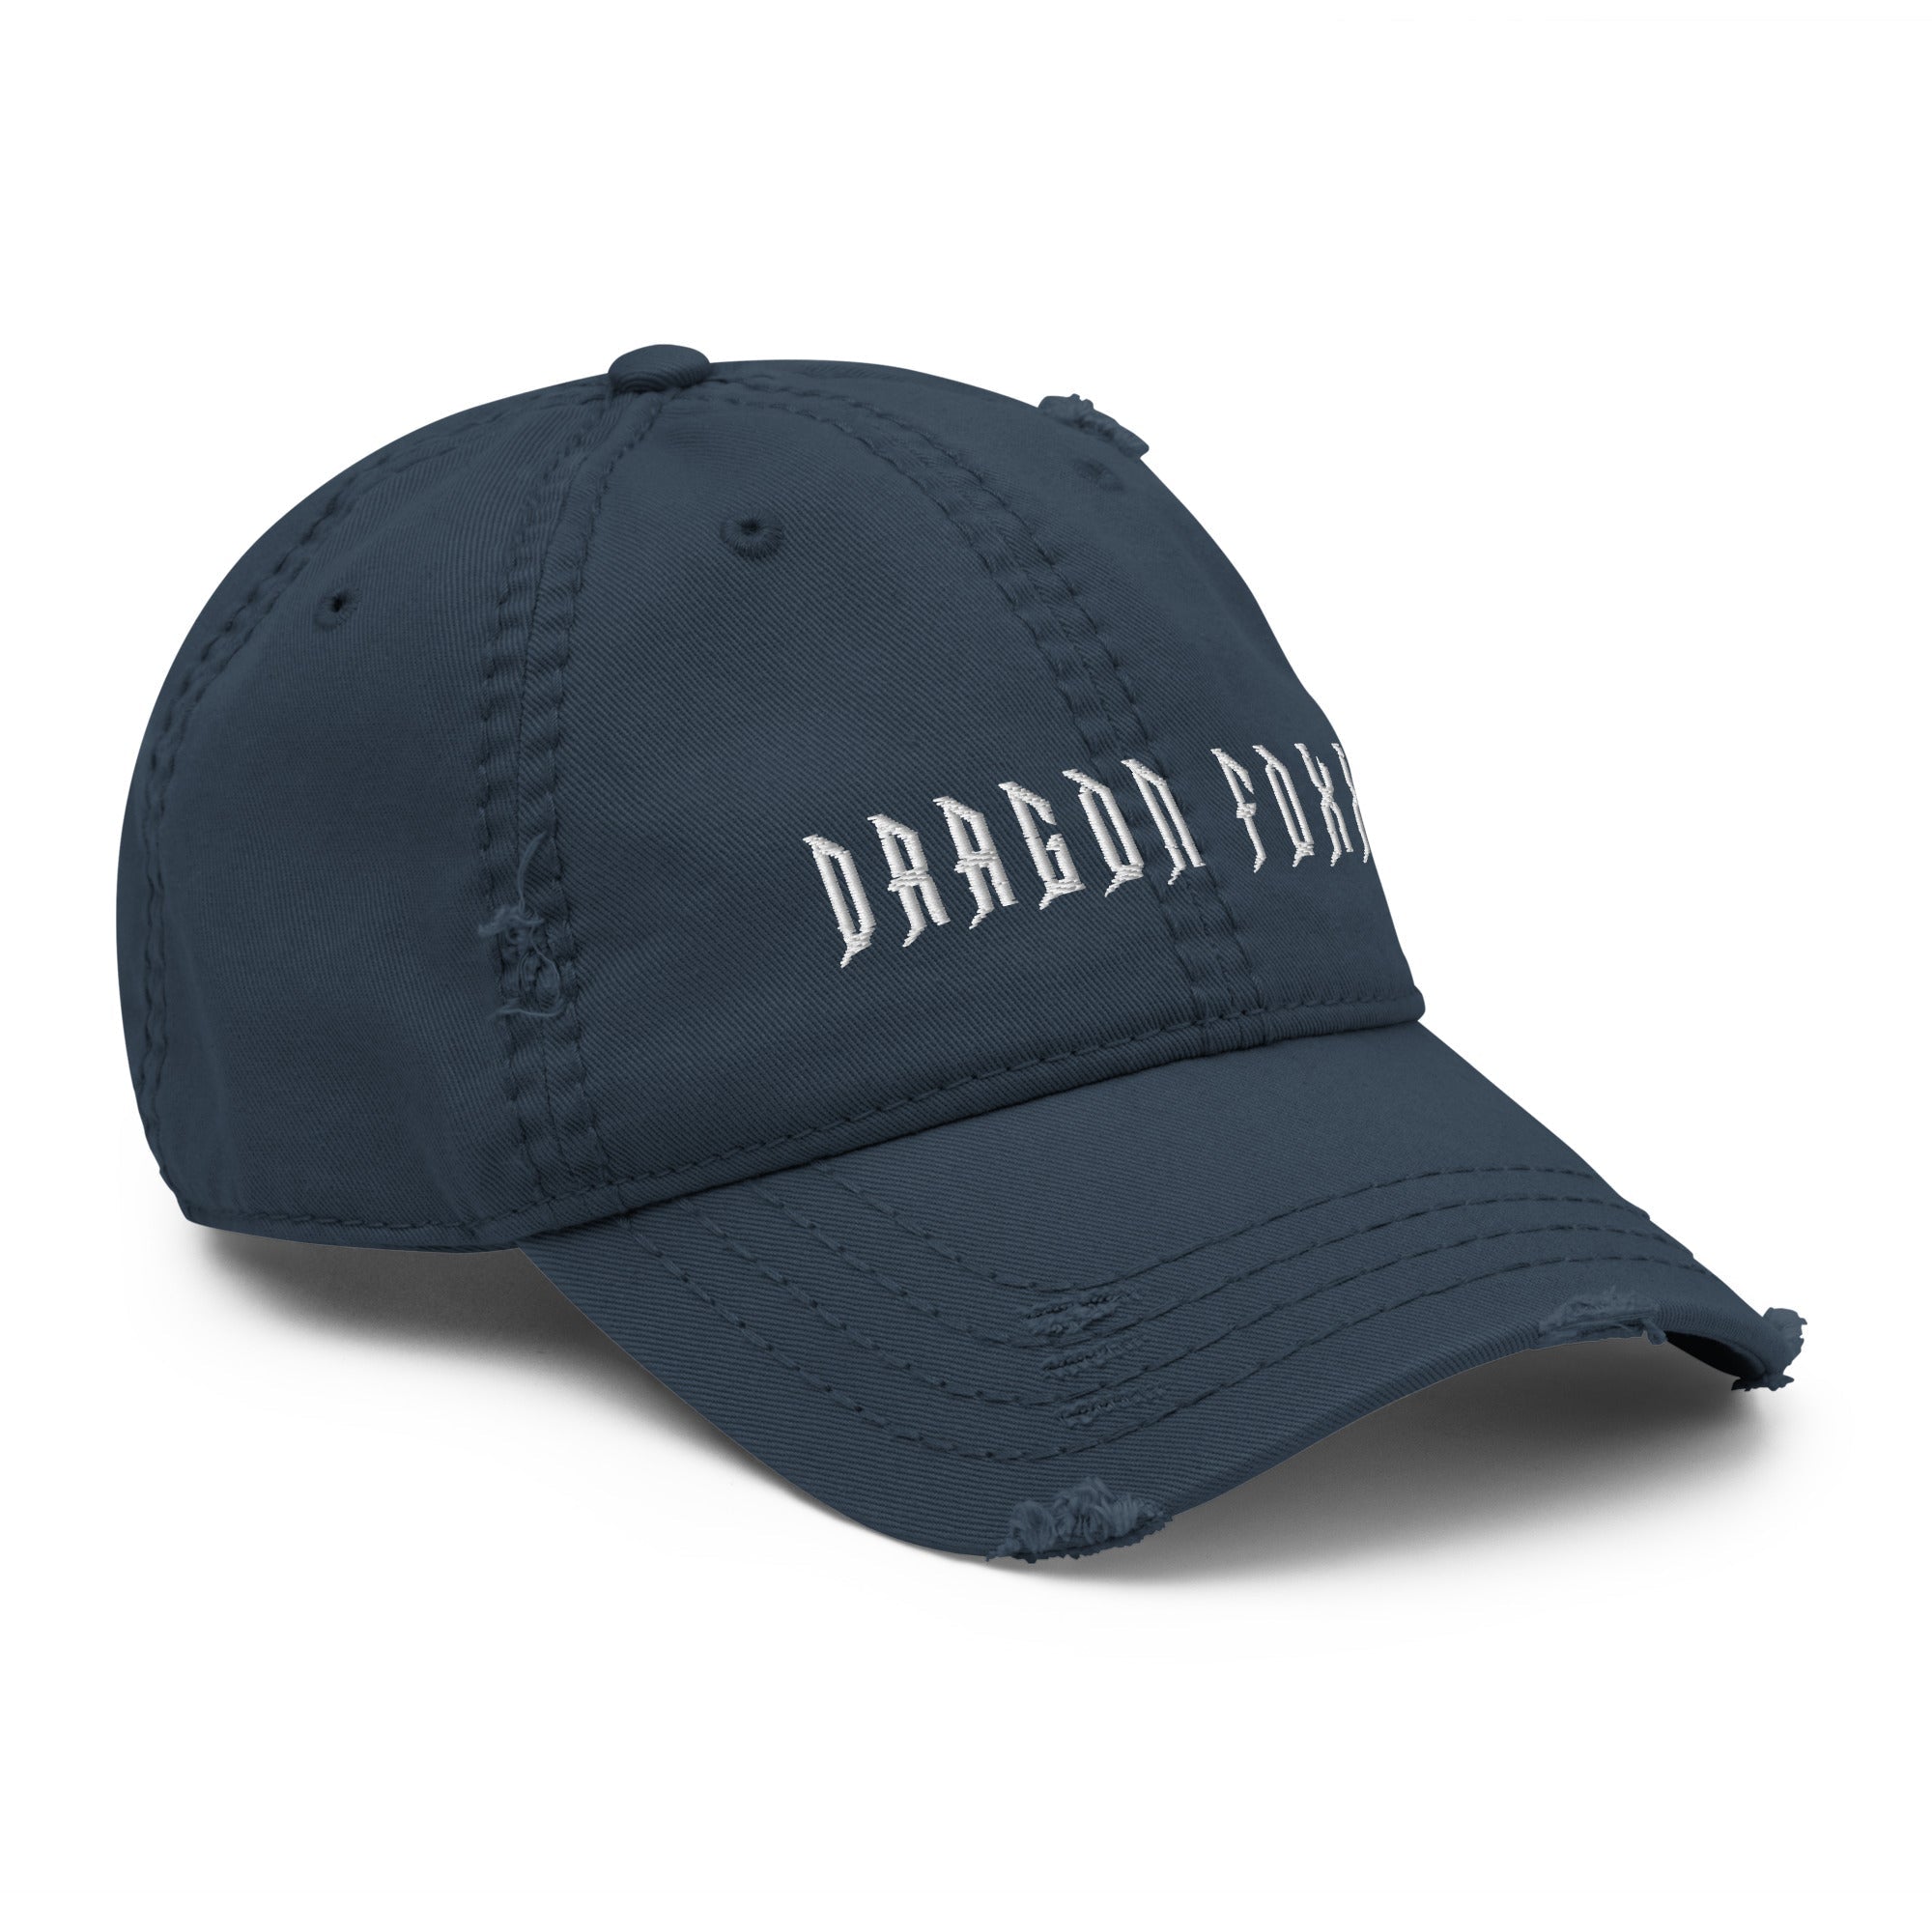 Distressed Dad Hats - White Embroidered - Distressed Dad Hat - DRAGON FOXX™ - Distressed Dad Hats - White Embroidered - 7823977_10991 - Navy - Distressed - One size - Accessories - Black Distressed Hat - Charcoal Grey Distressed Hat